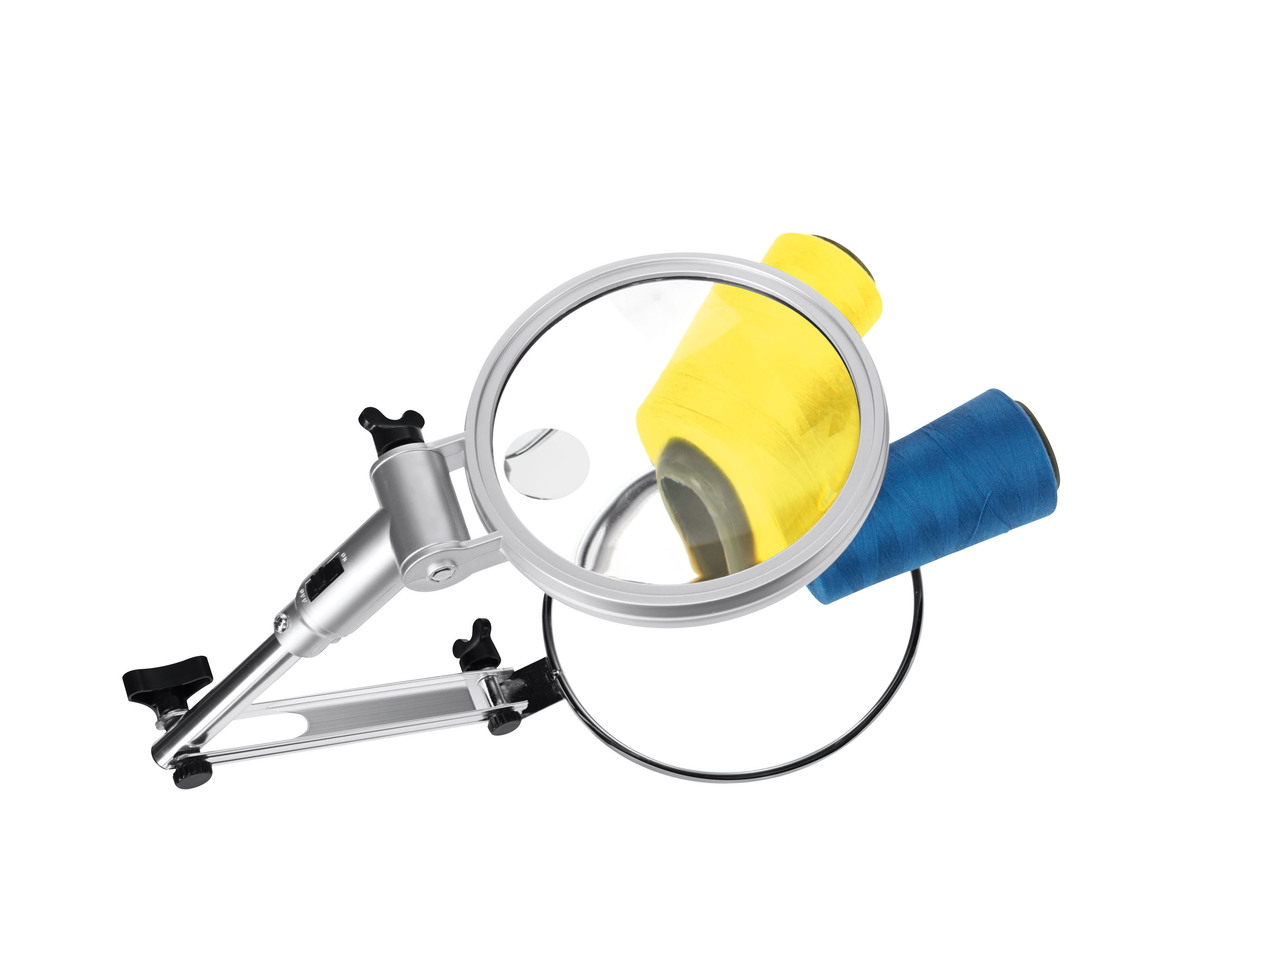 LED Magnifying Lens for Sewing